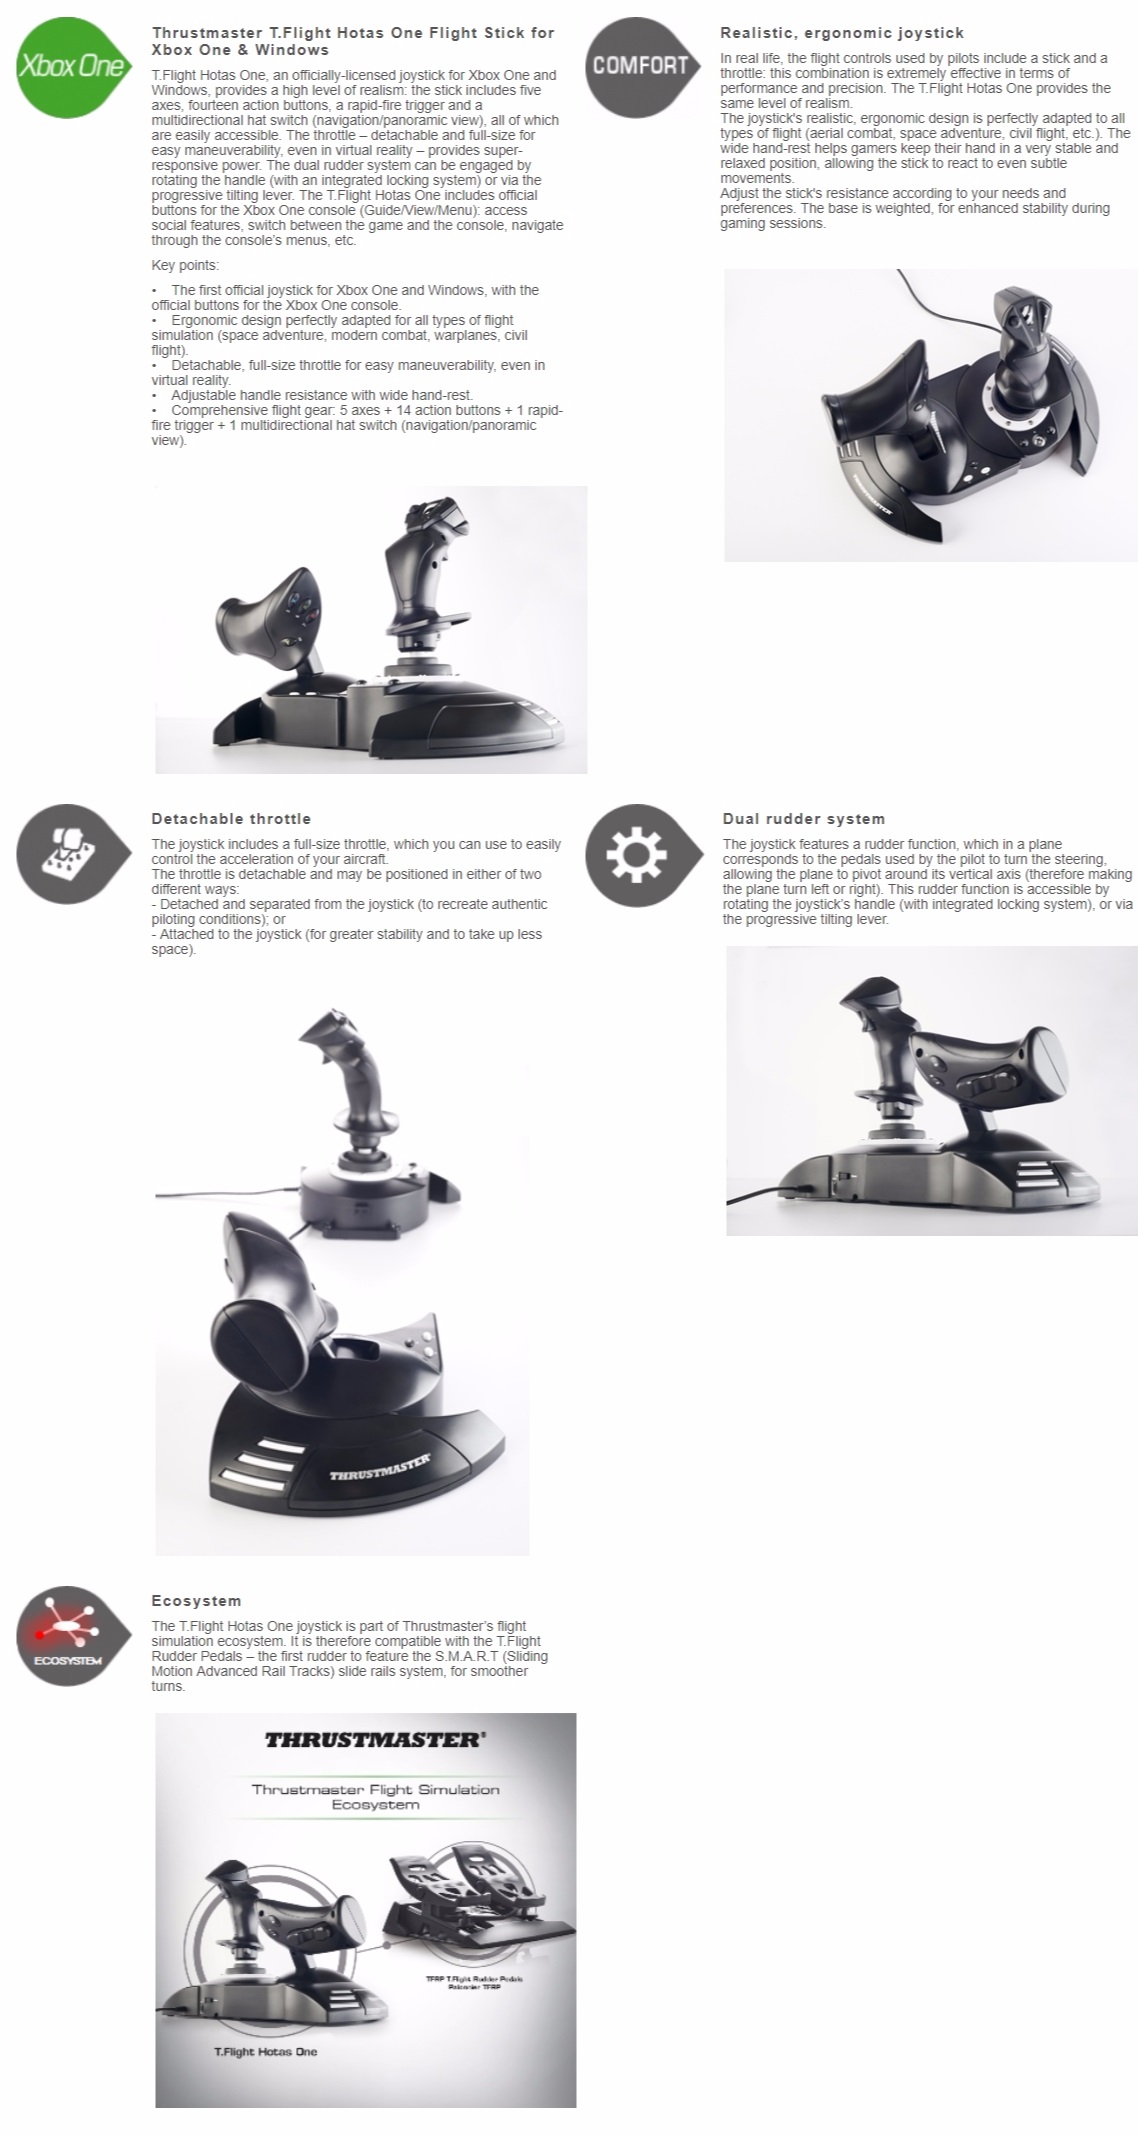 A large marketing image providing additional information about the product Thrustmaster T.Flight HOTAS One Joystick For PC & Xbox One - Additional alt info not provided